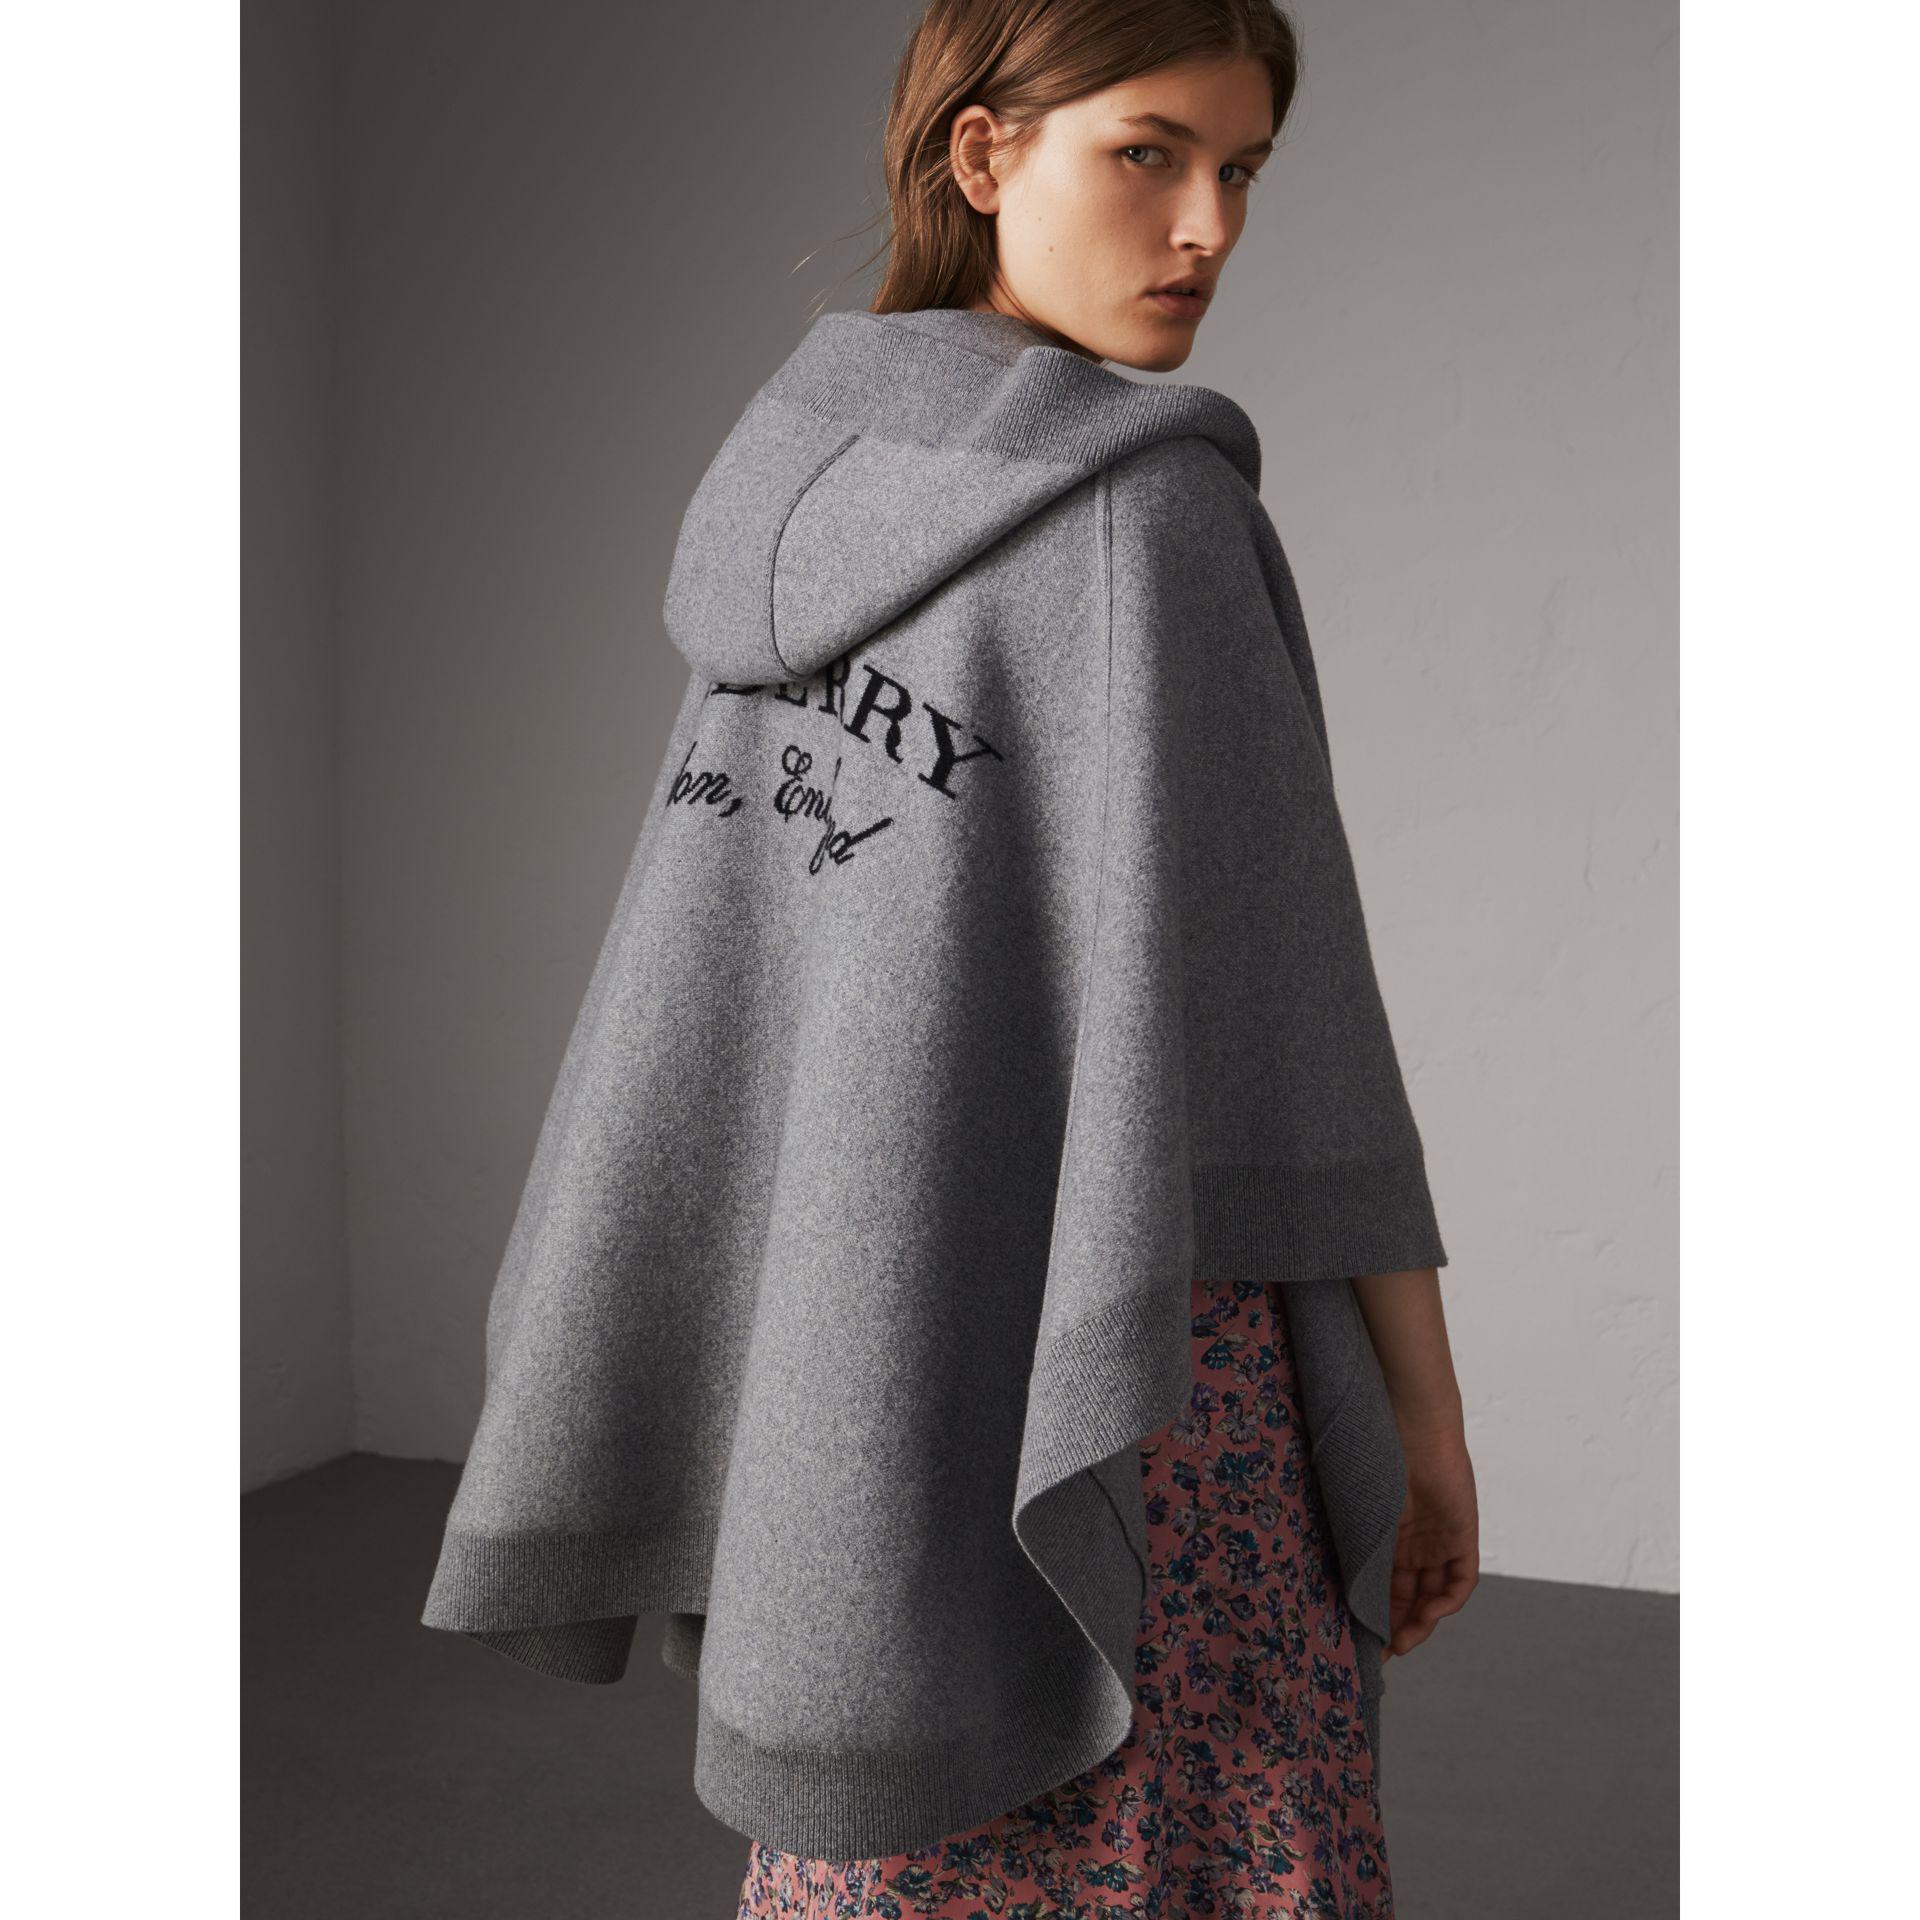 Burberry Wool Cashmere Blend Hooded Poncho in Mid Grey Melange (Gray) - Lyst